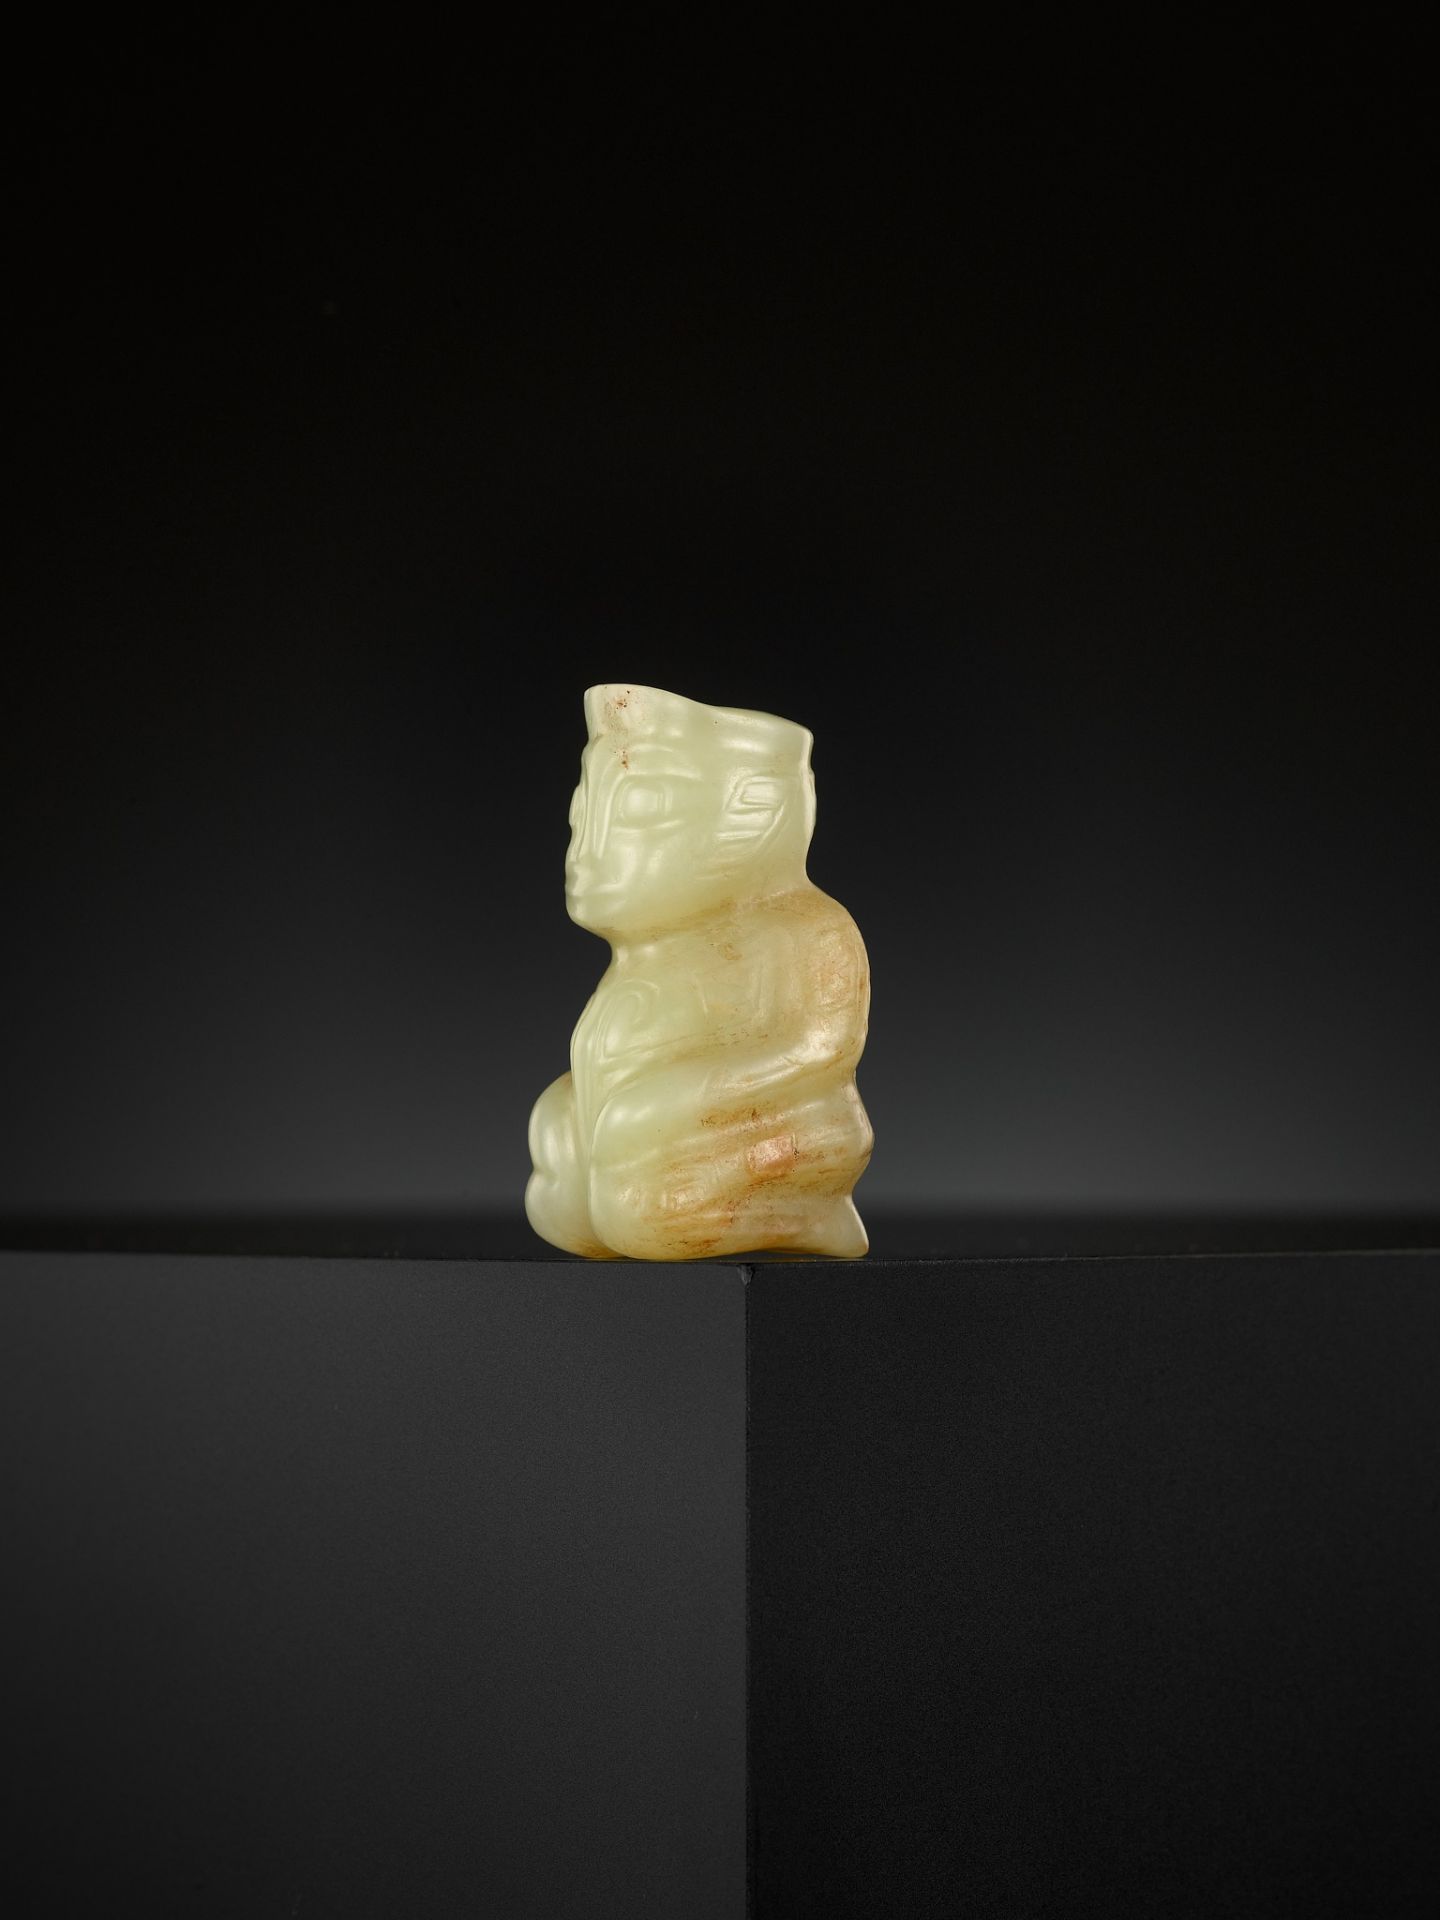 AN EXTREMELY RARE YELLOW JADE 'KNEELING FIGURE', SHANG DYNASTY - Image 12 of 17